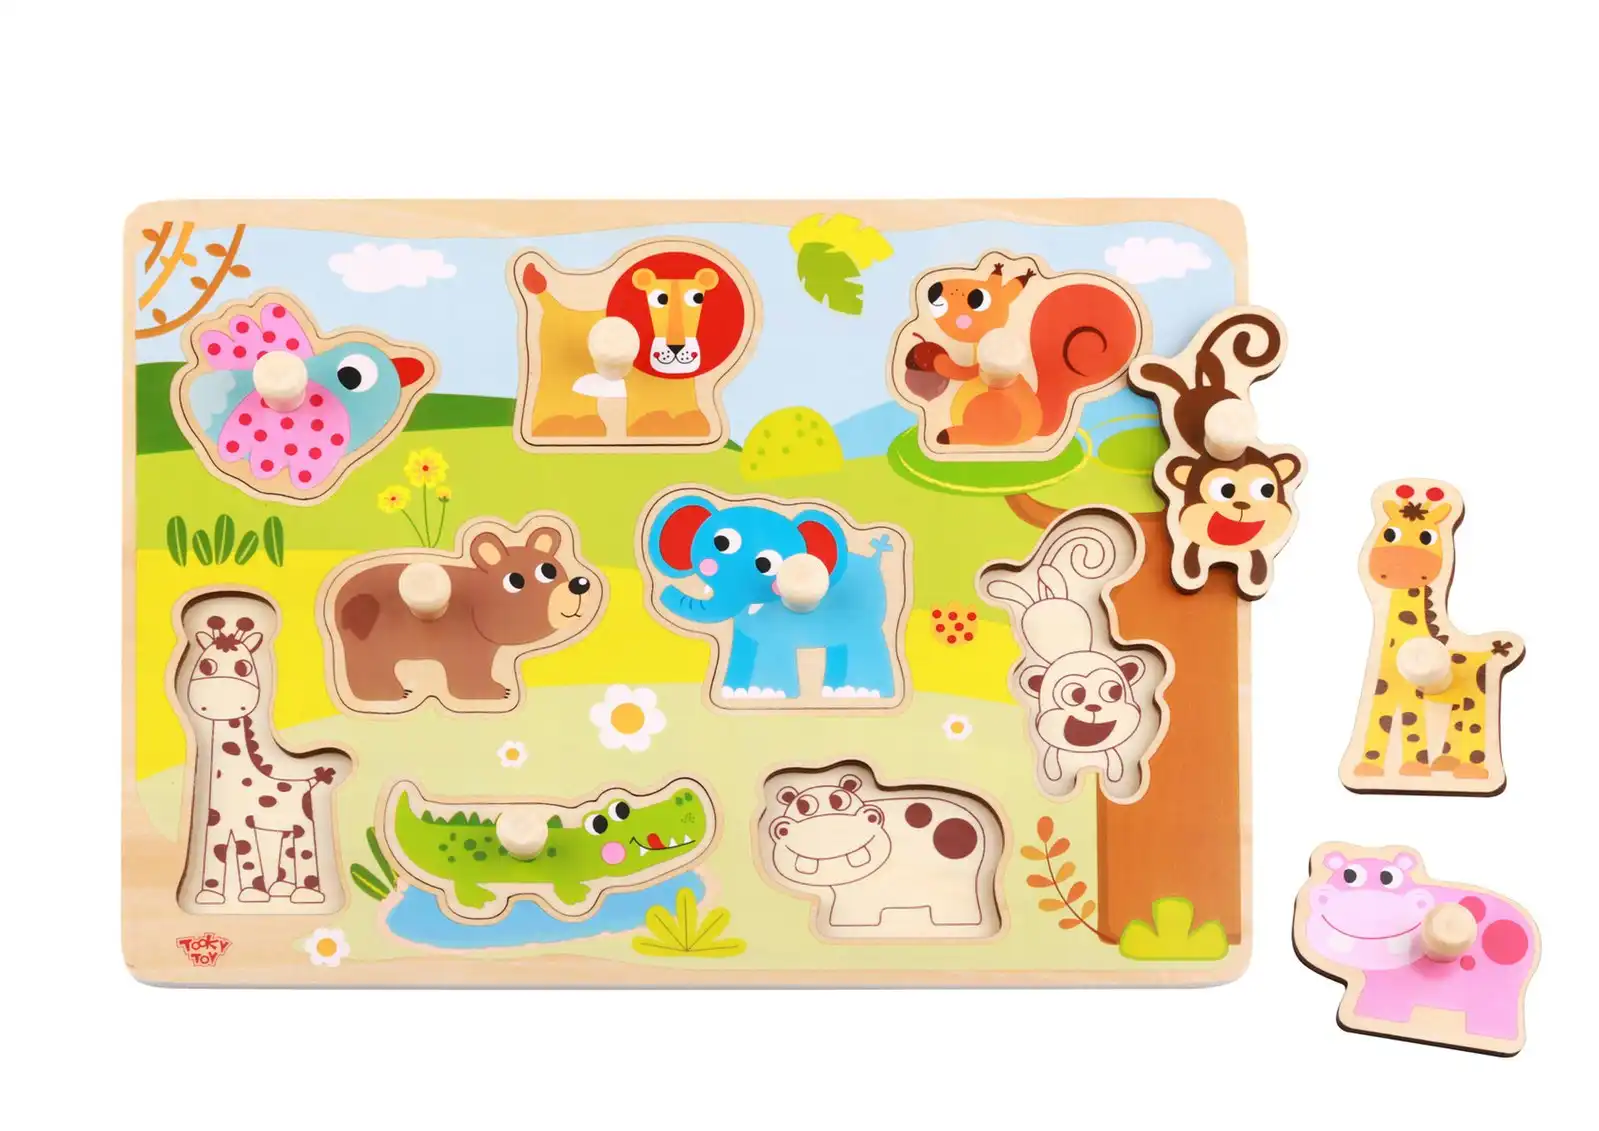 Tooky Toy Wooden Animal Peg Kids/Toddler Learning Play 30cm Puzzle Board 18m+